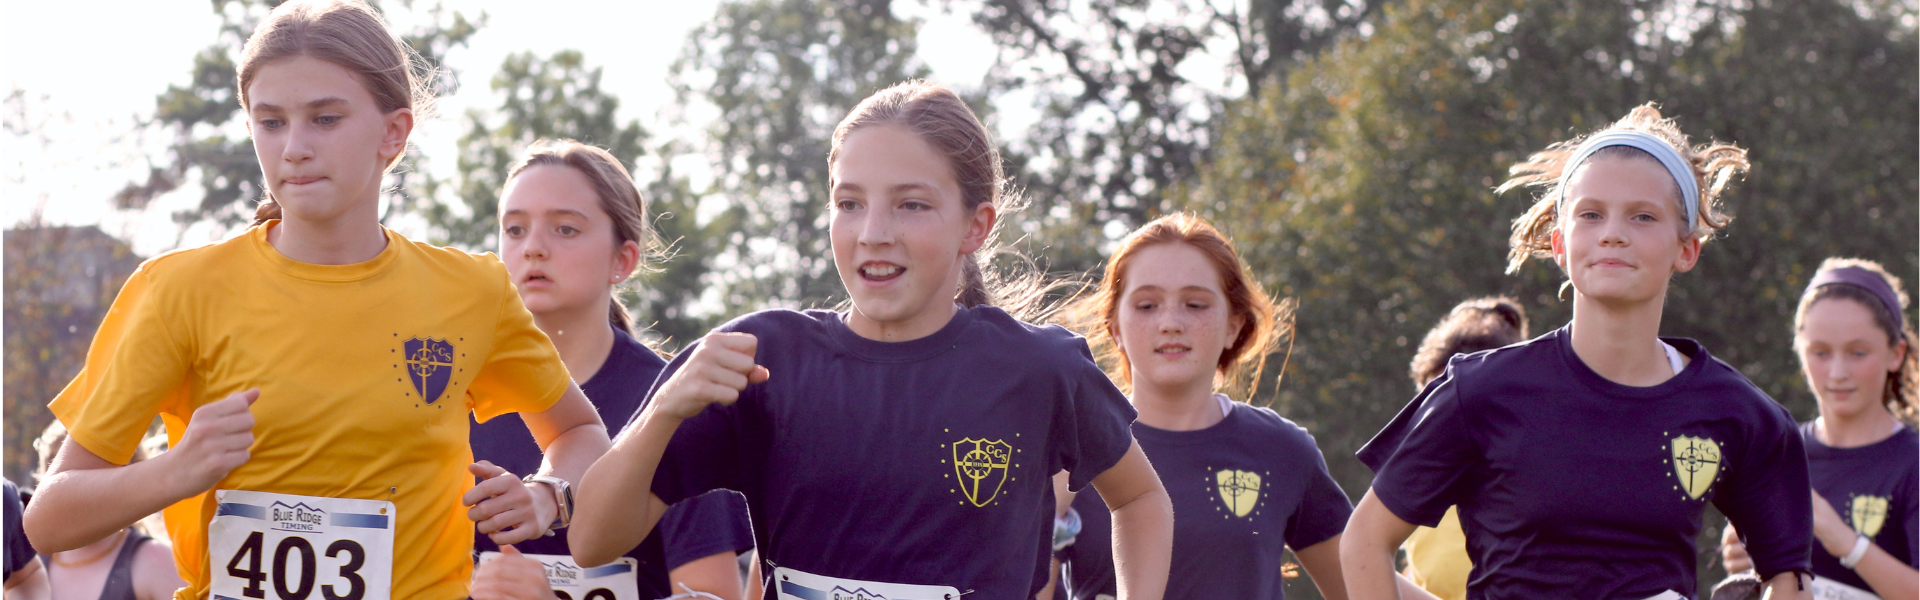 Students participate in cross country meet